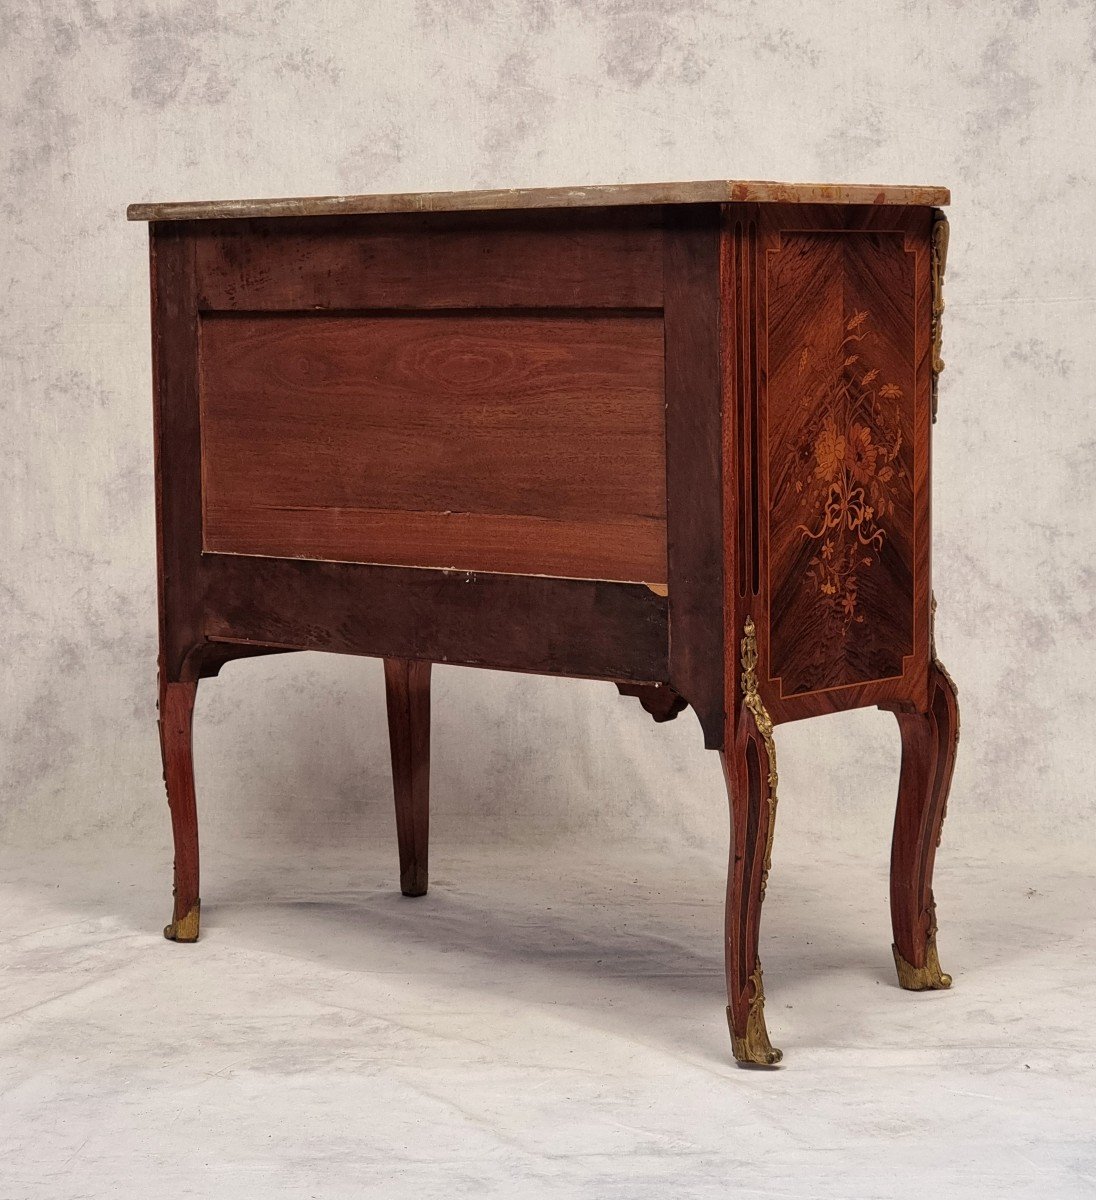 Transition Style Commode Napoleon III Period - Floral Marquetry - Rosewood - 19th-photo-4